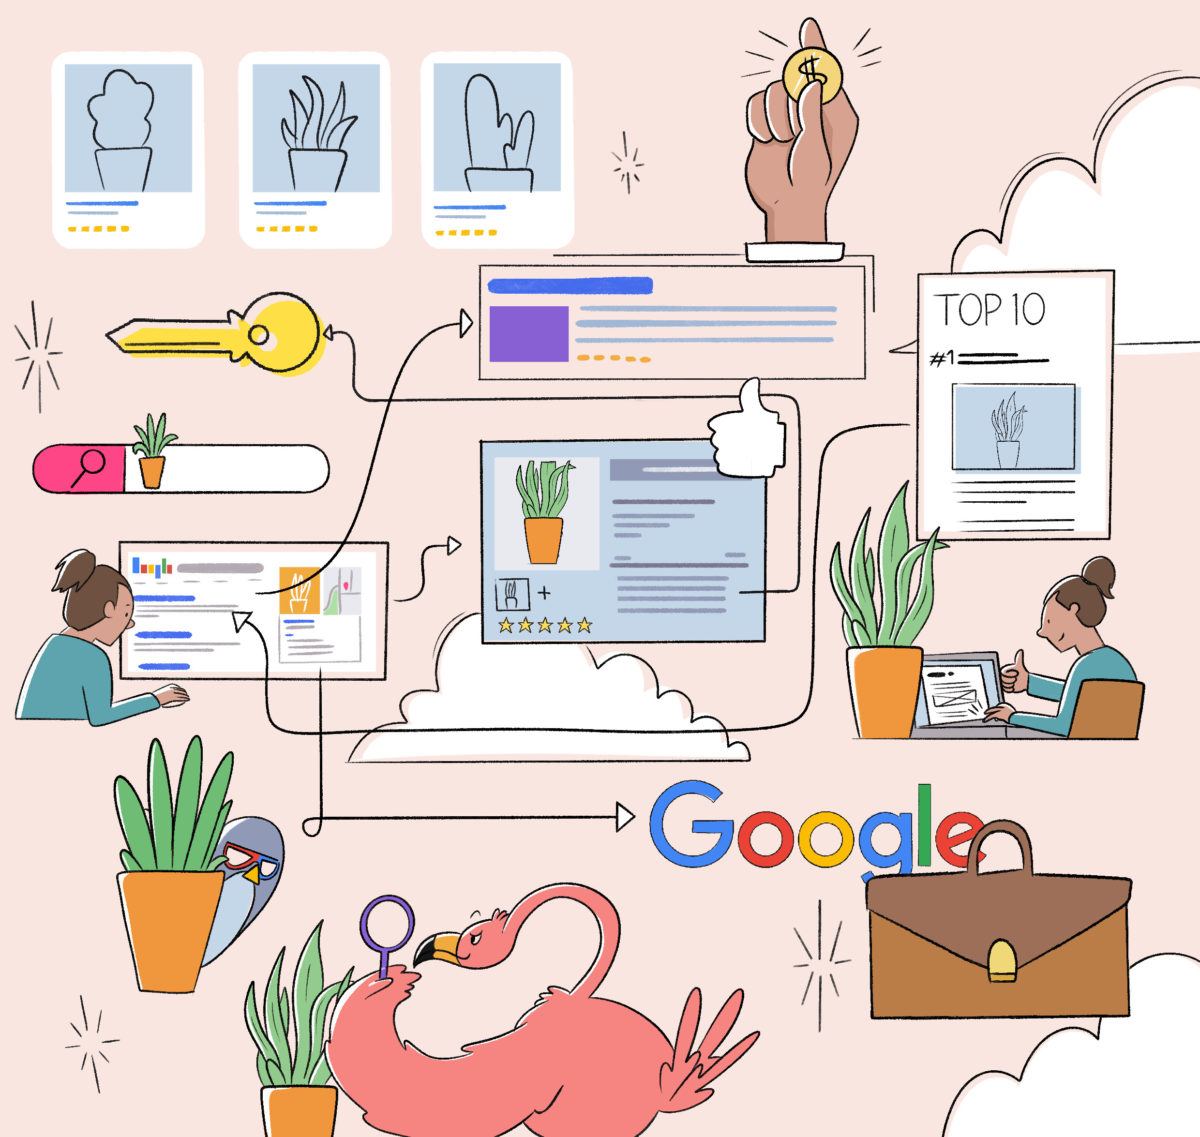 Illustration of people using google search on various devices surrounded by houseplants and whimsical elements.